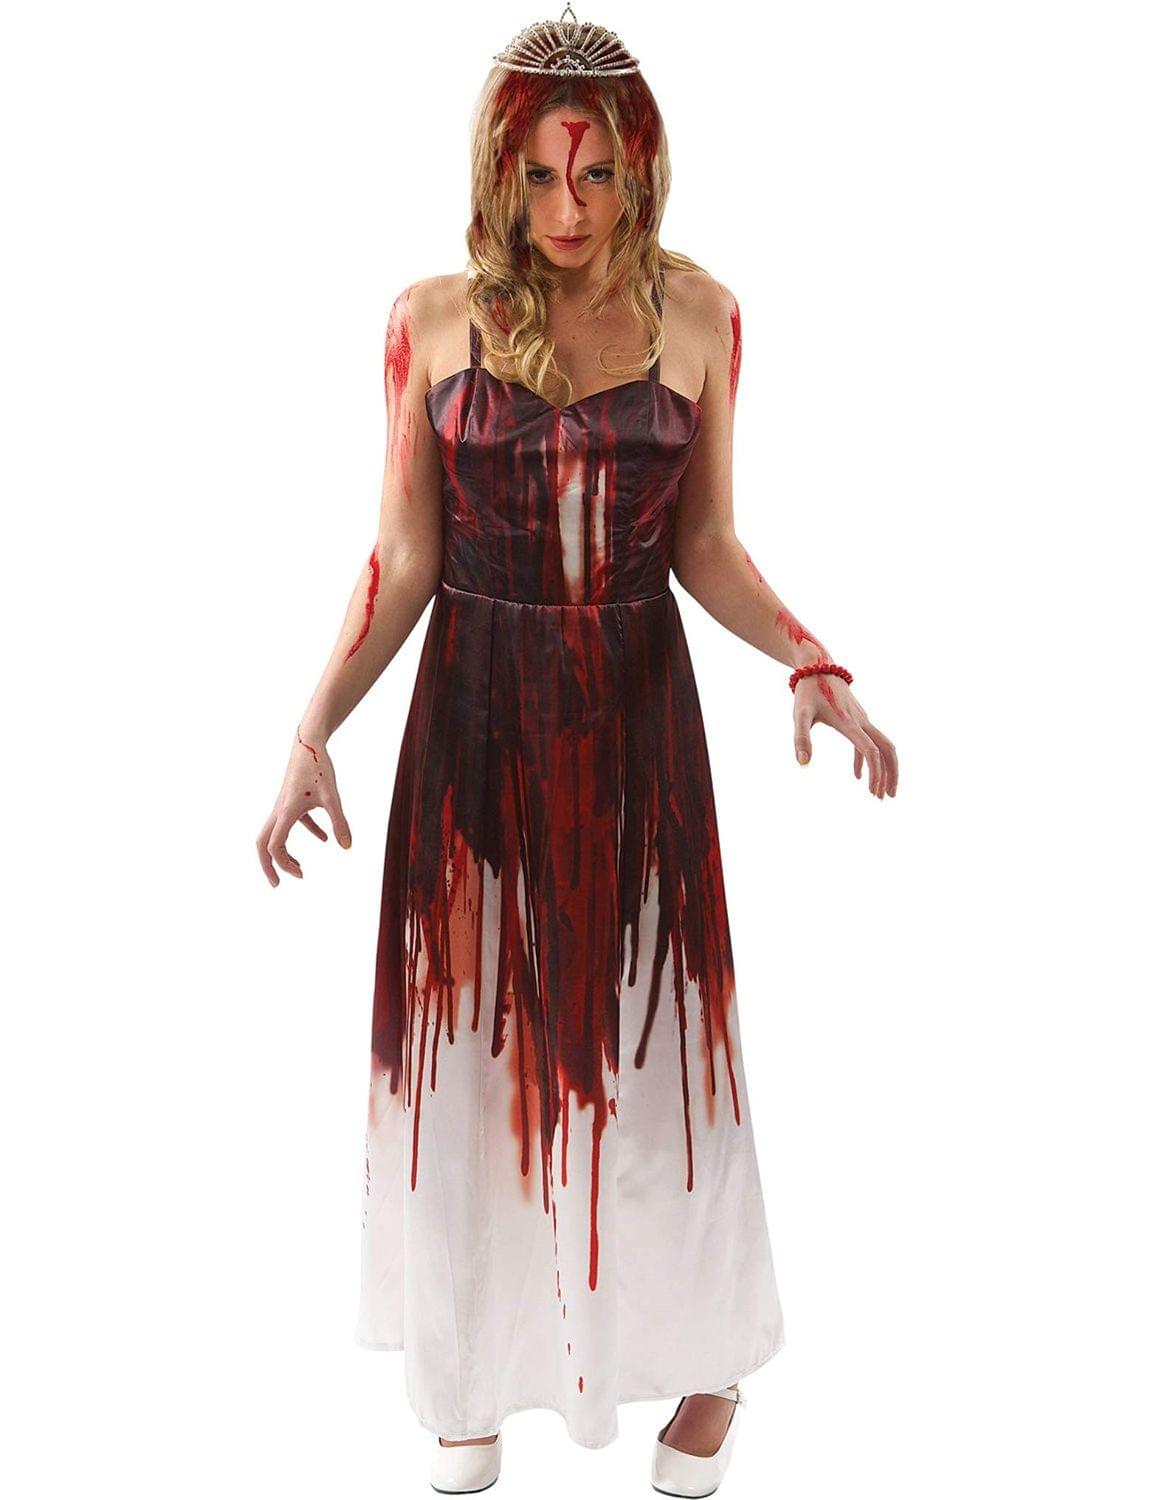 Carrie Bloody Prom Queen Adult Costume Dress